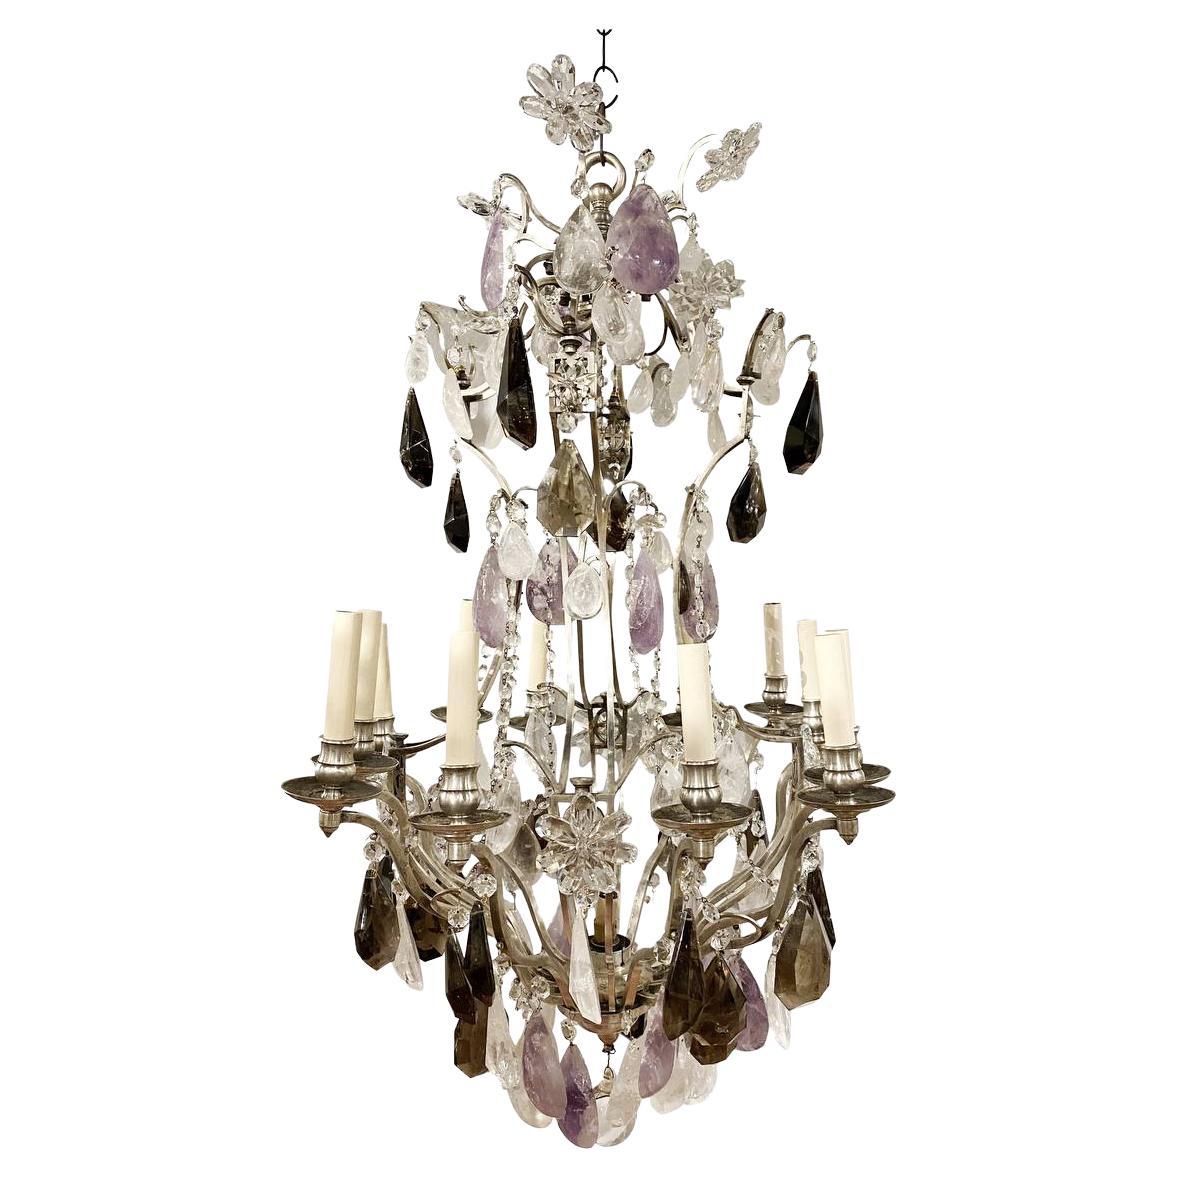 1900's French Silver Plated Chandelier with Rock and Amethyst Crystals